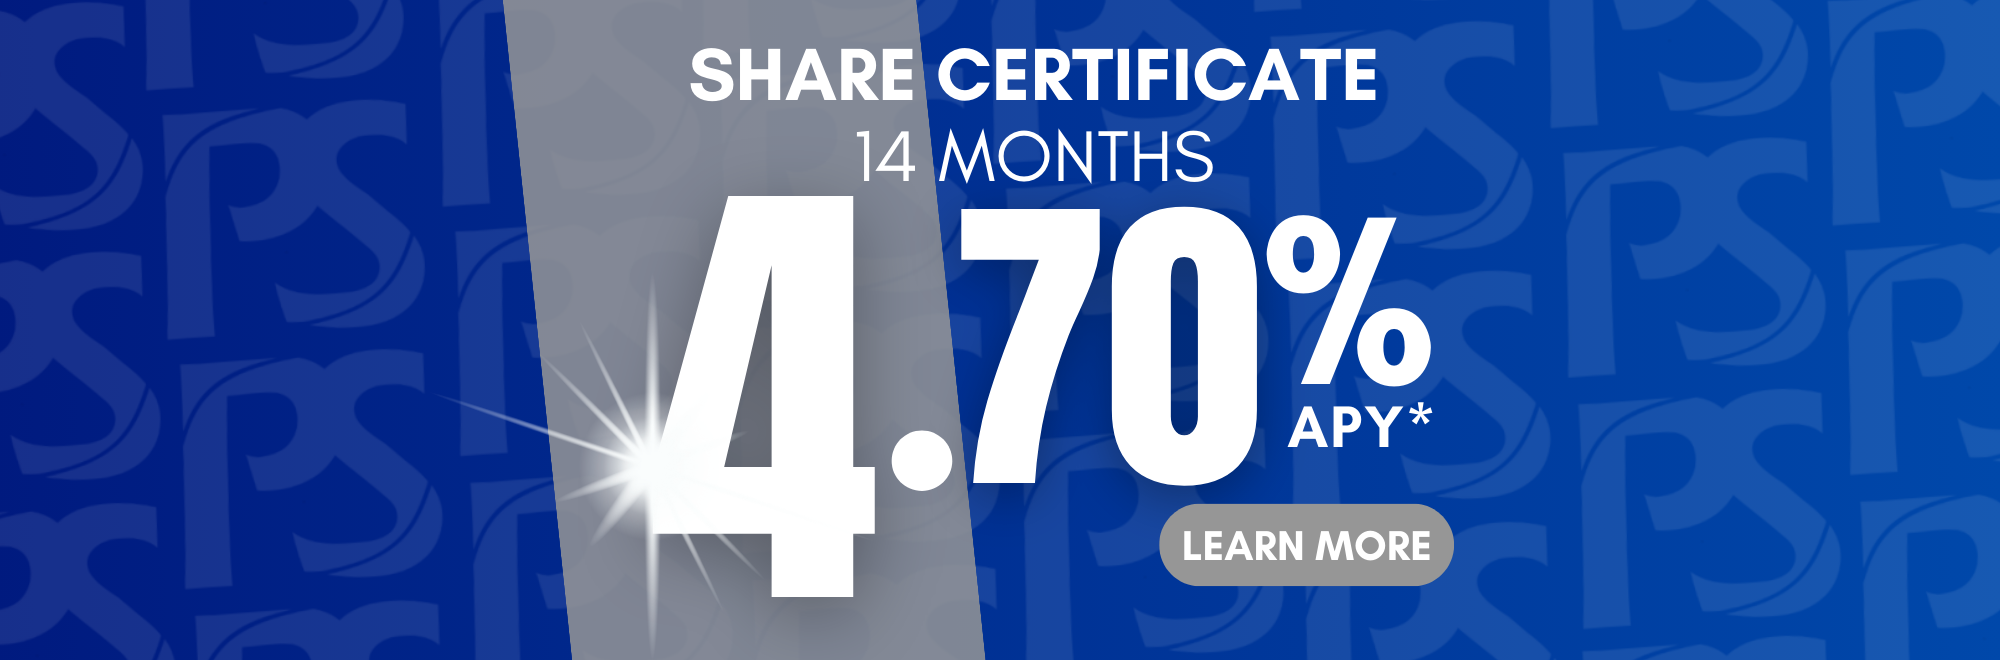 Share Certificate 14 months 4.70%APY* click to learn more